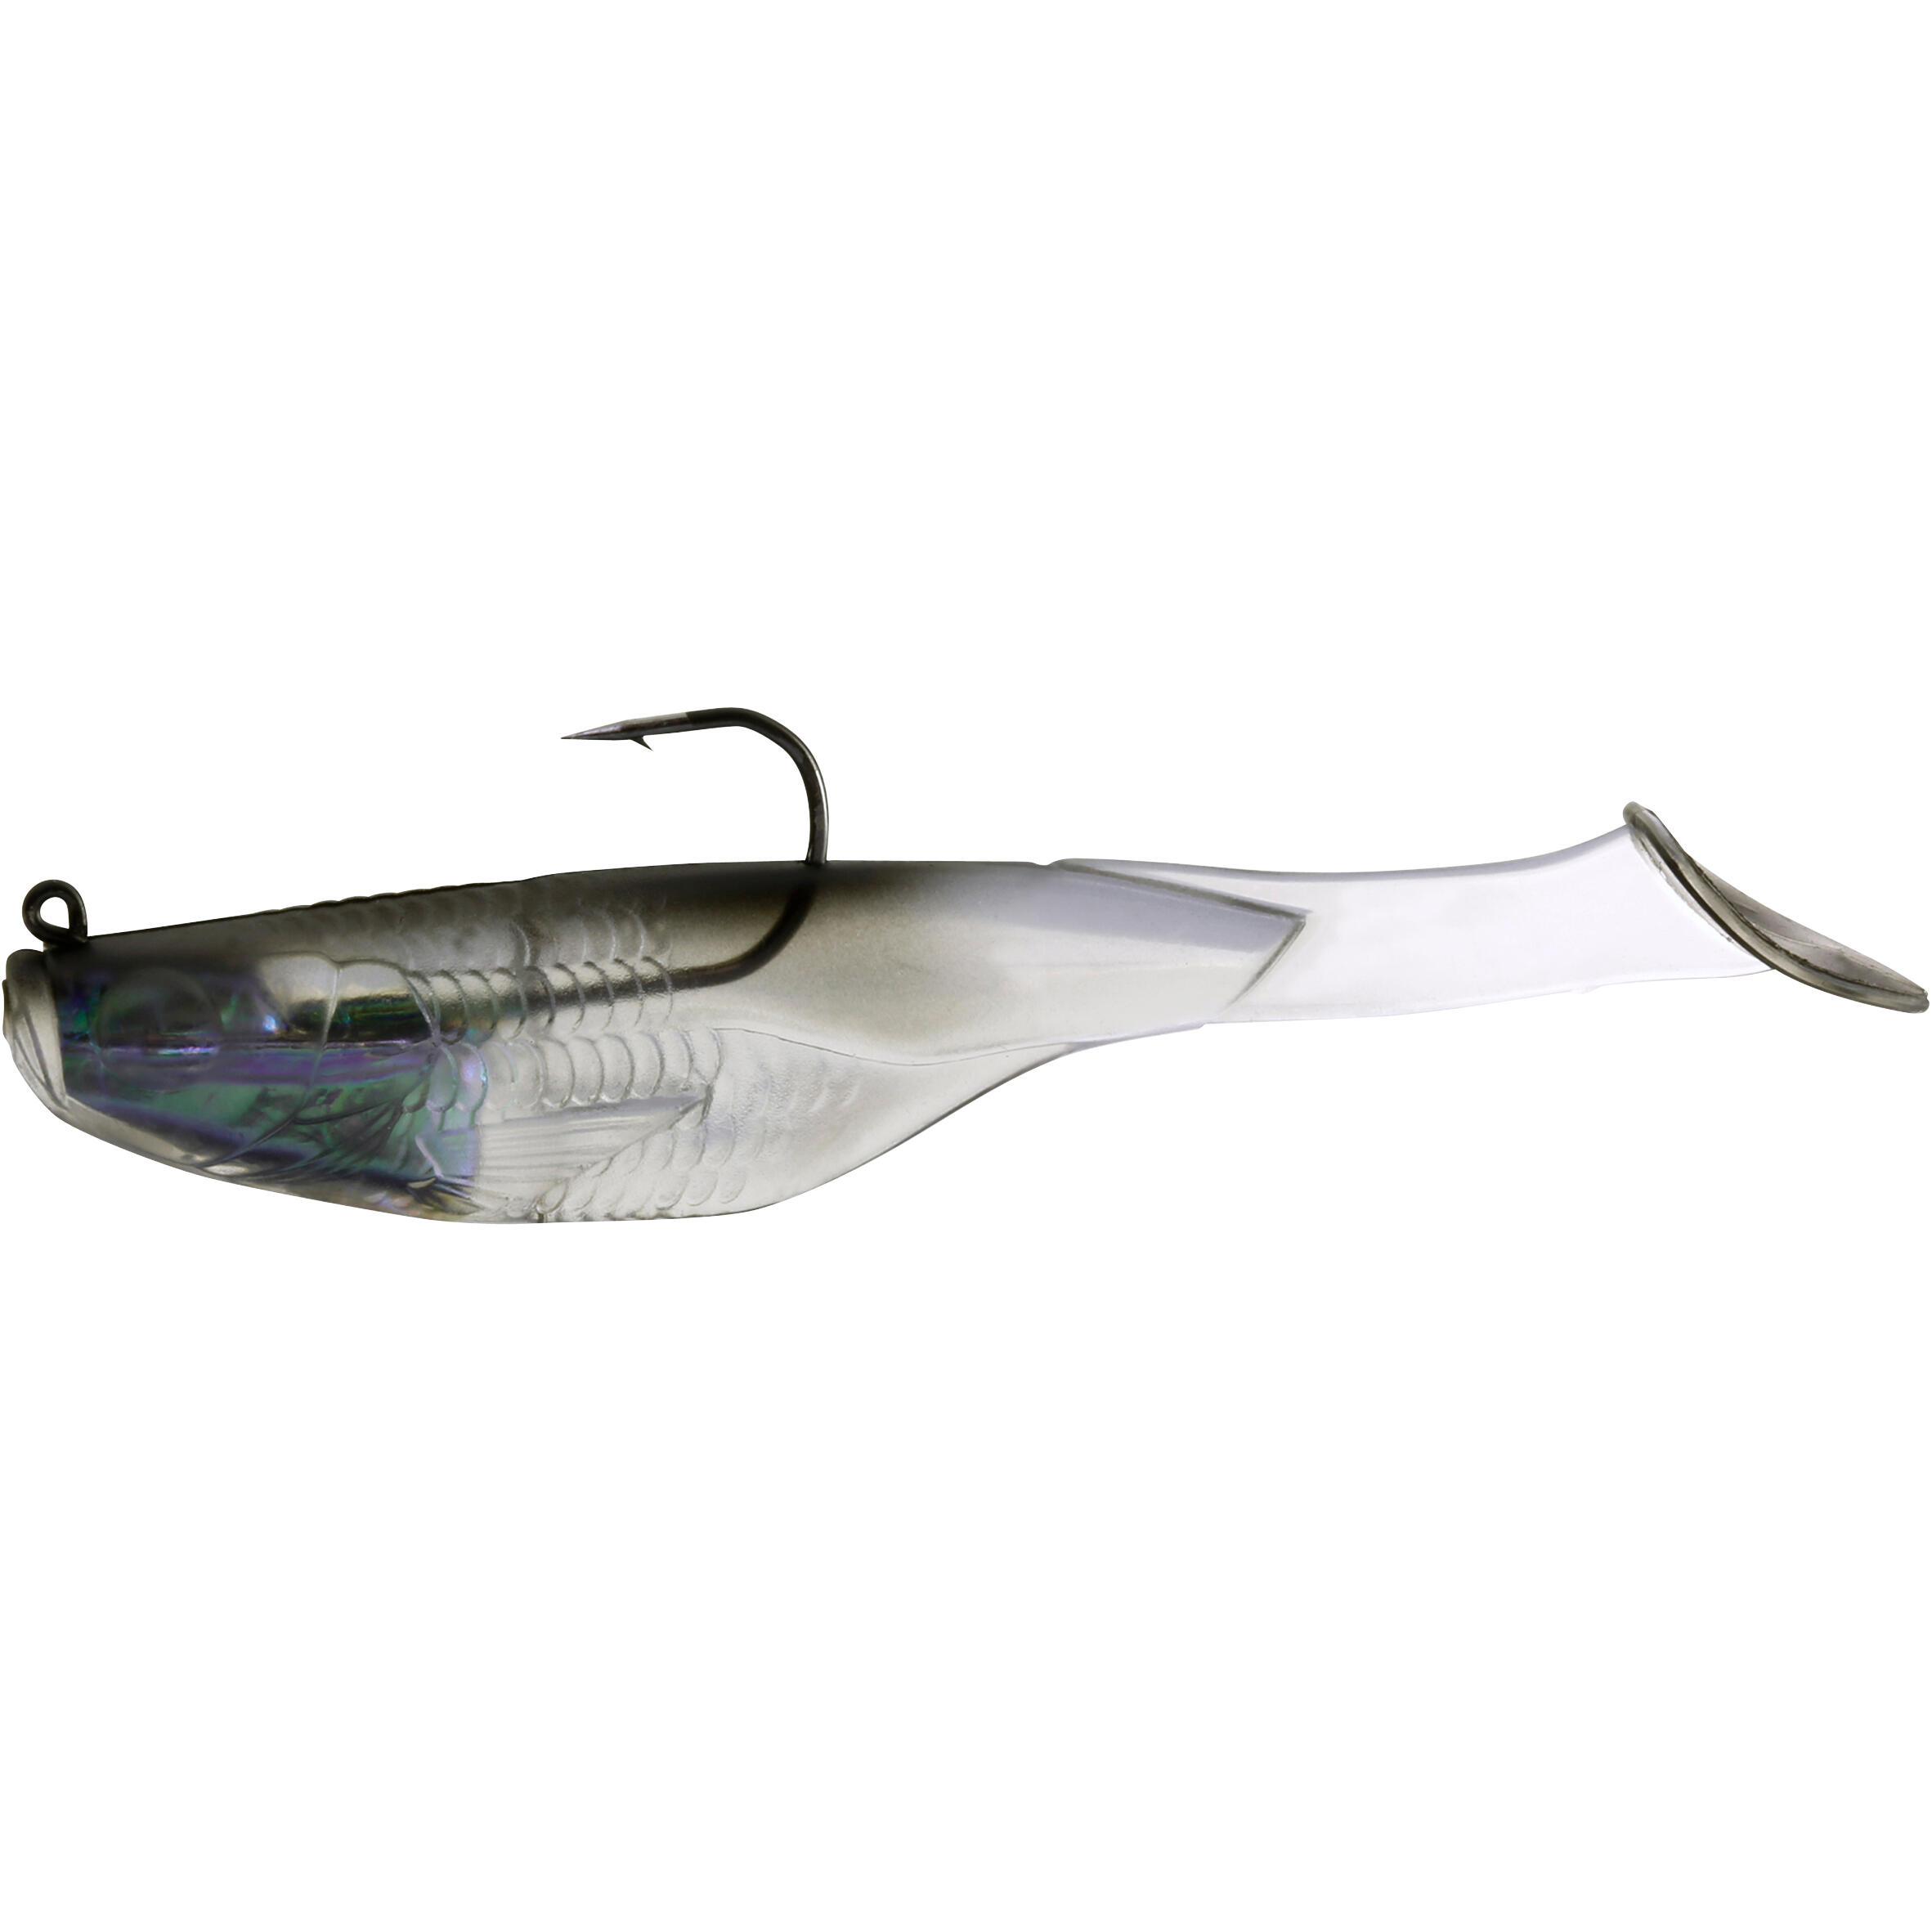 Fishing Soft Lure Chelt 100 Black - One Size By CAPERLAN | Decathlon